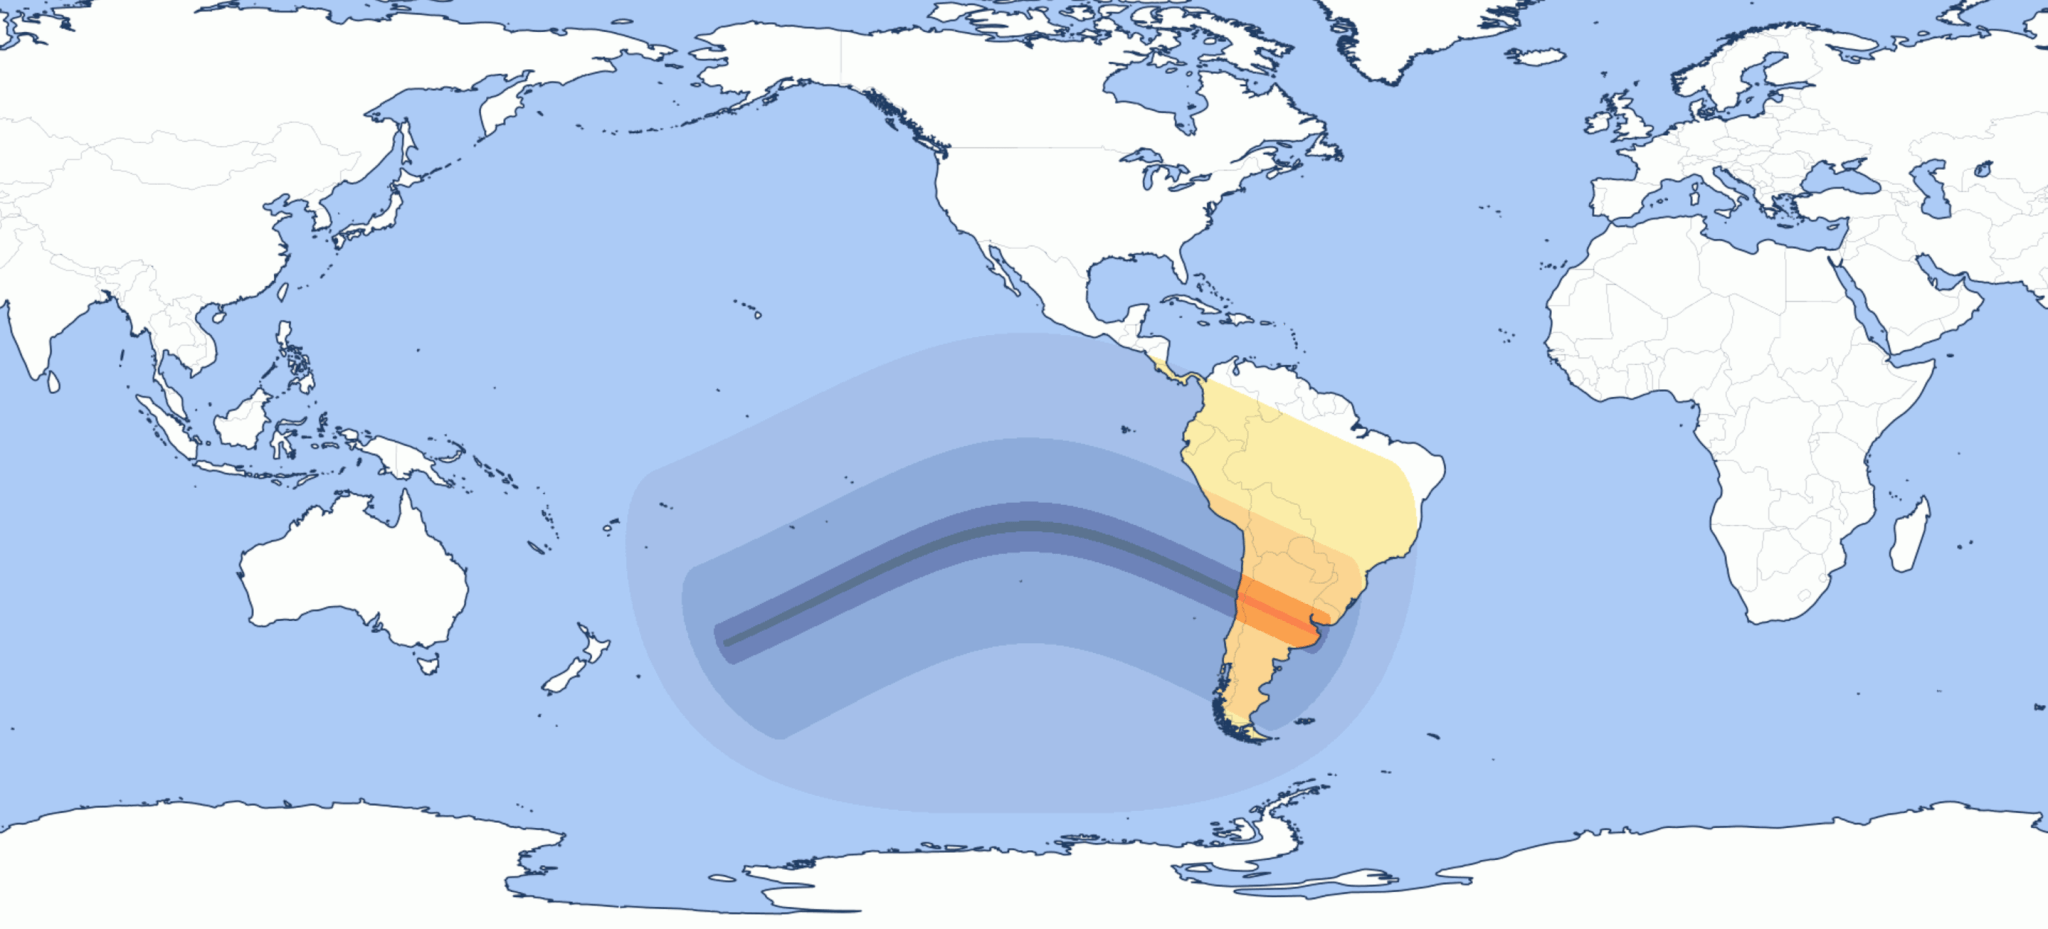 Total solar eclipse Buenos Aires 2019 July 2